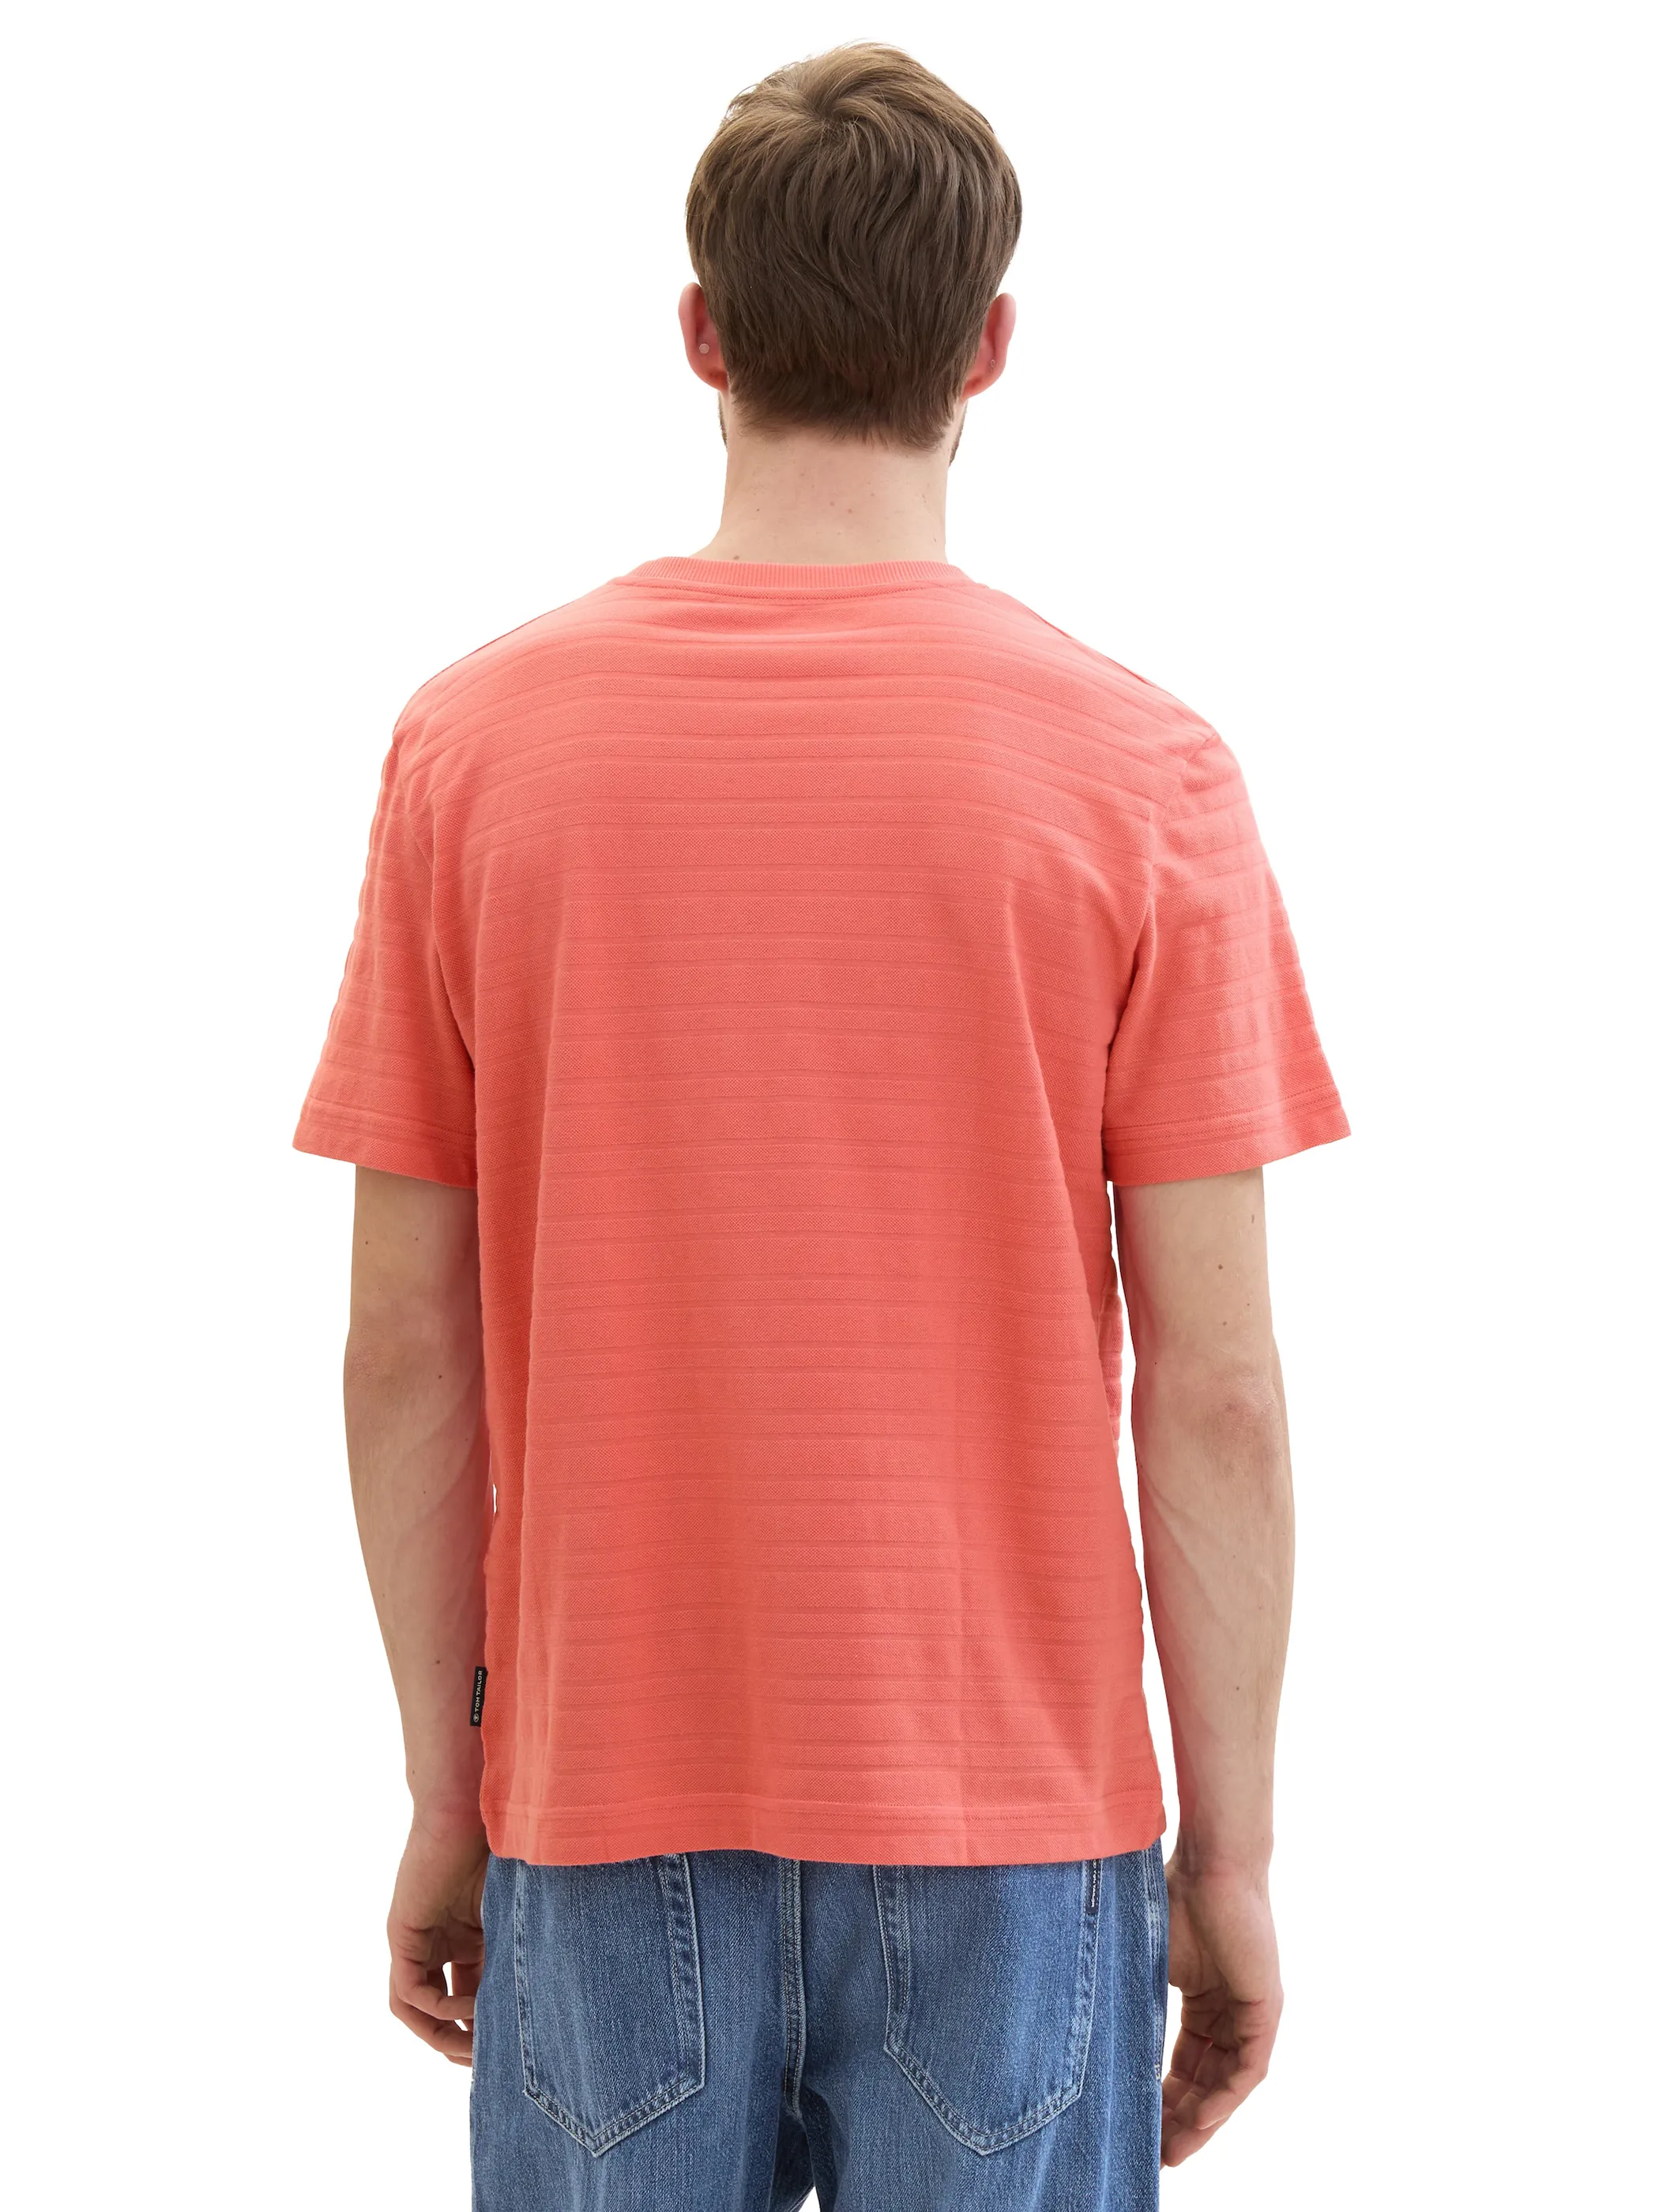 Tom Tailor 1042131 structured t-shirt Pink 895628 26202 2